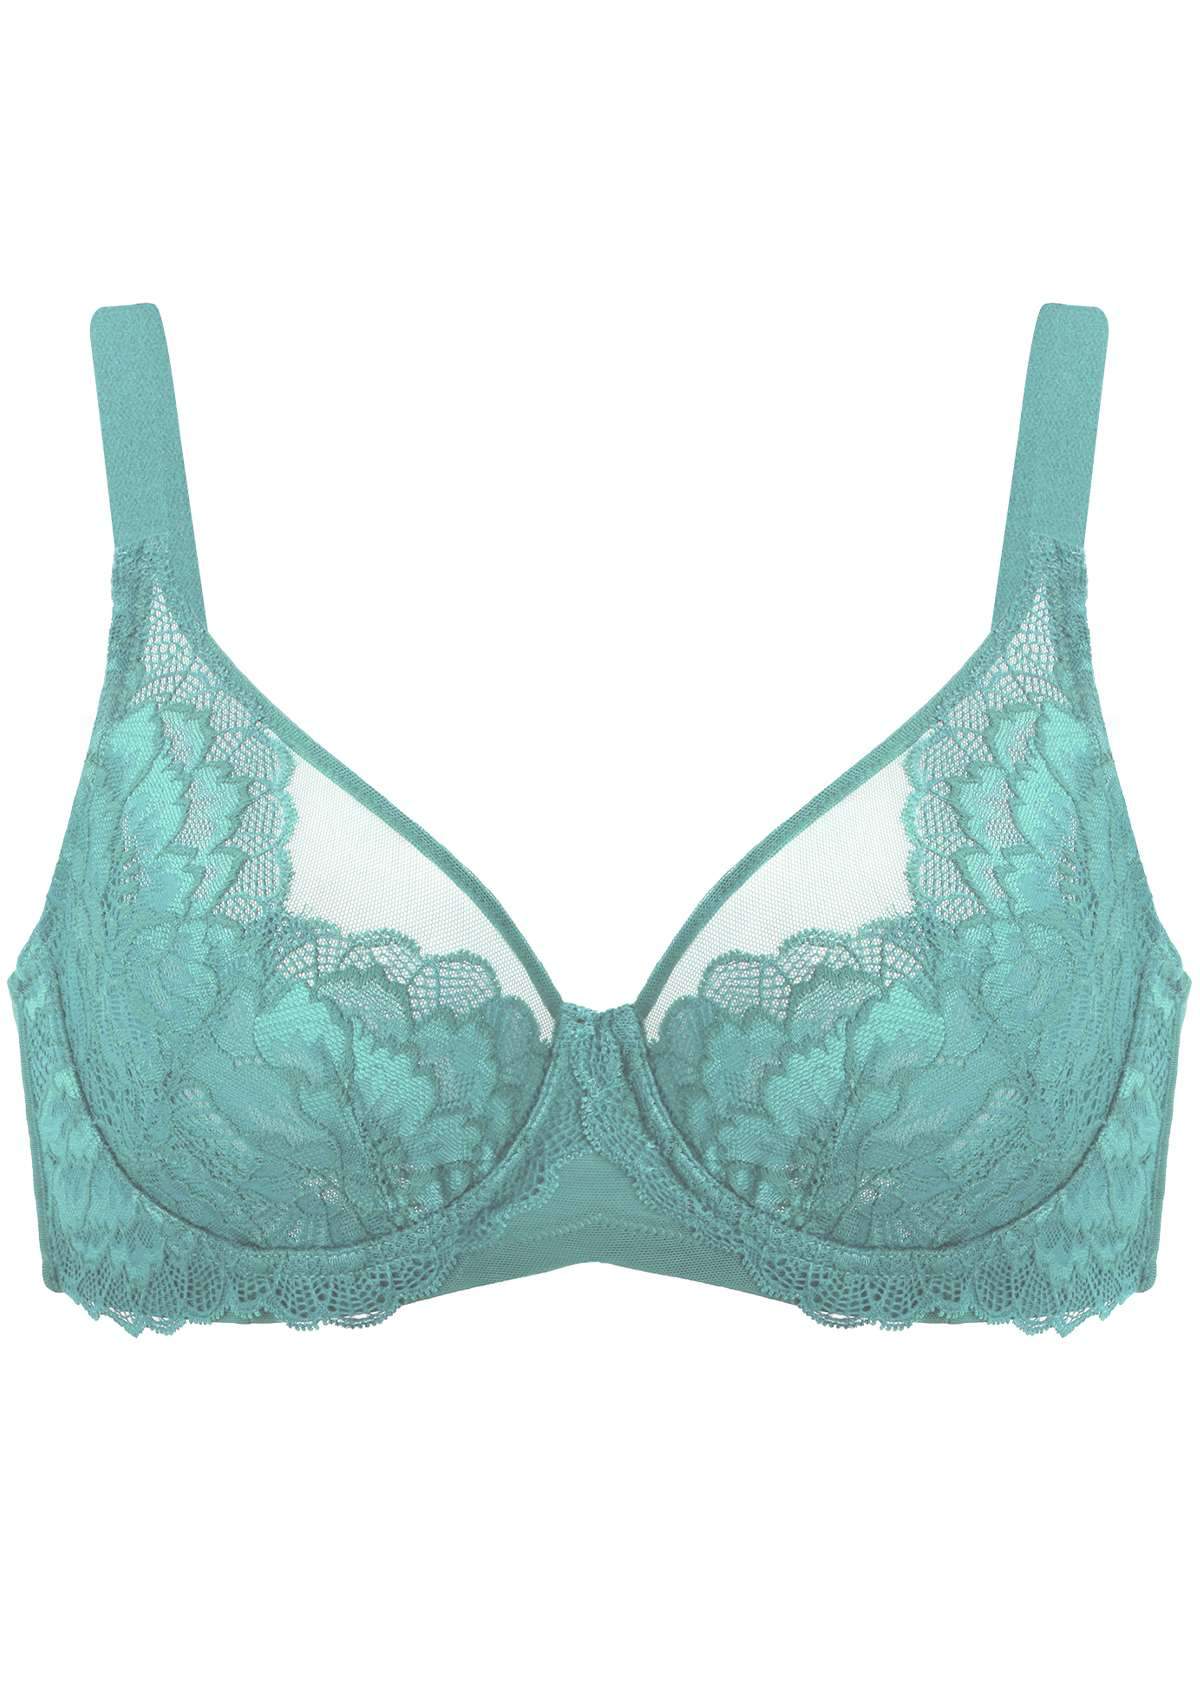 HSIA Paeonia Lace Full Coverage Underwire Non-Padded Uplifting Bra - Purple / 40 / C